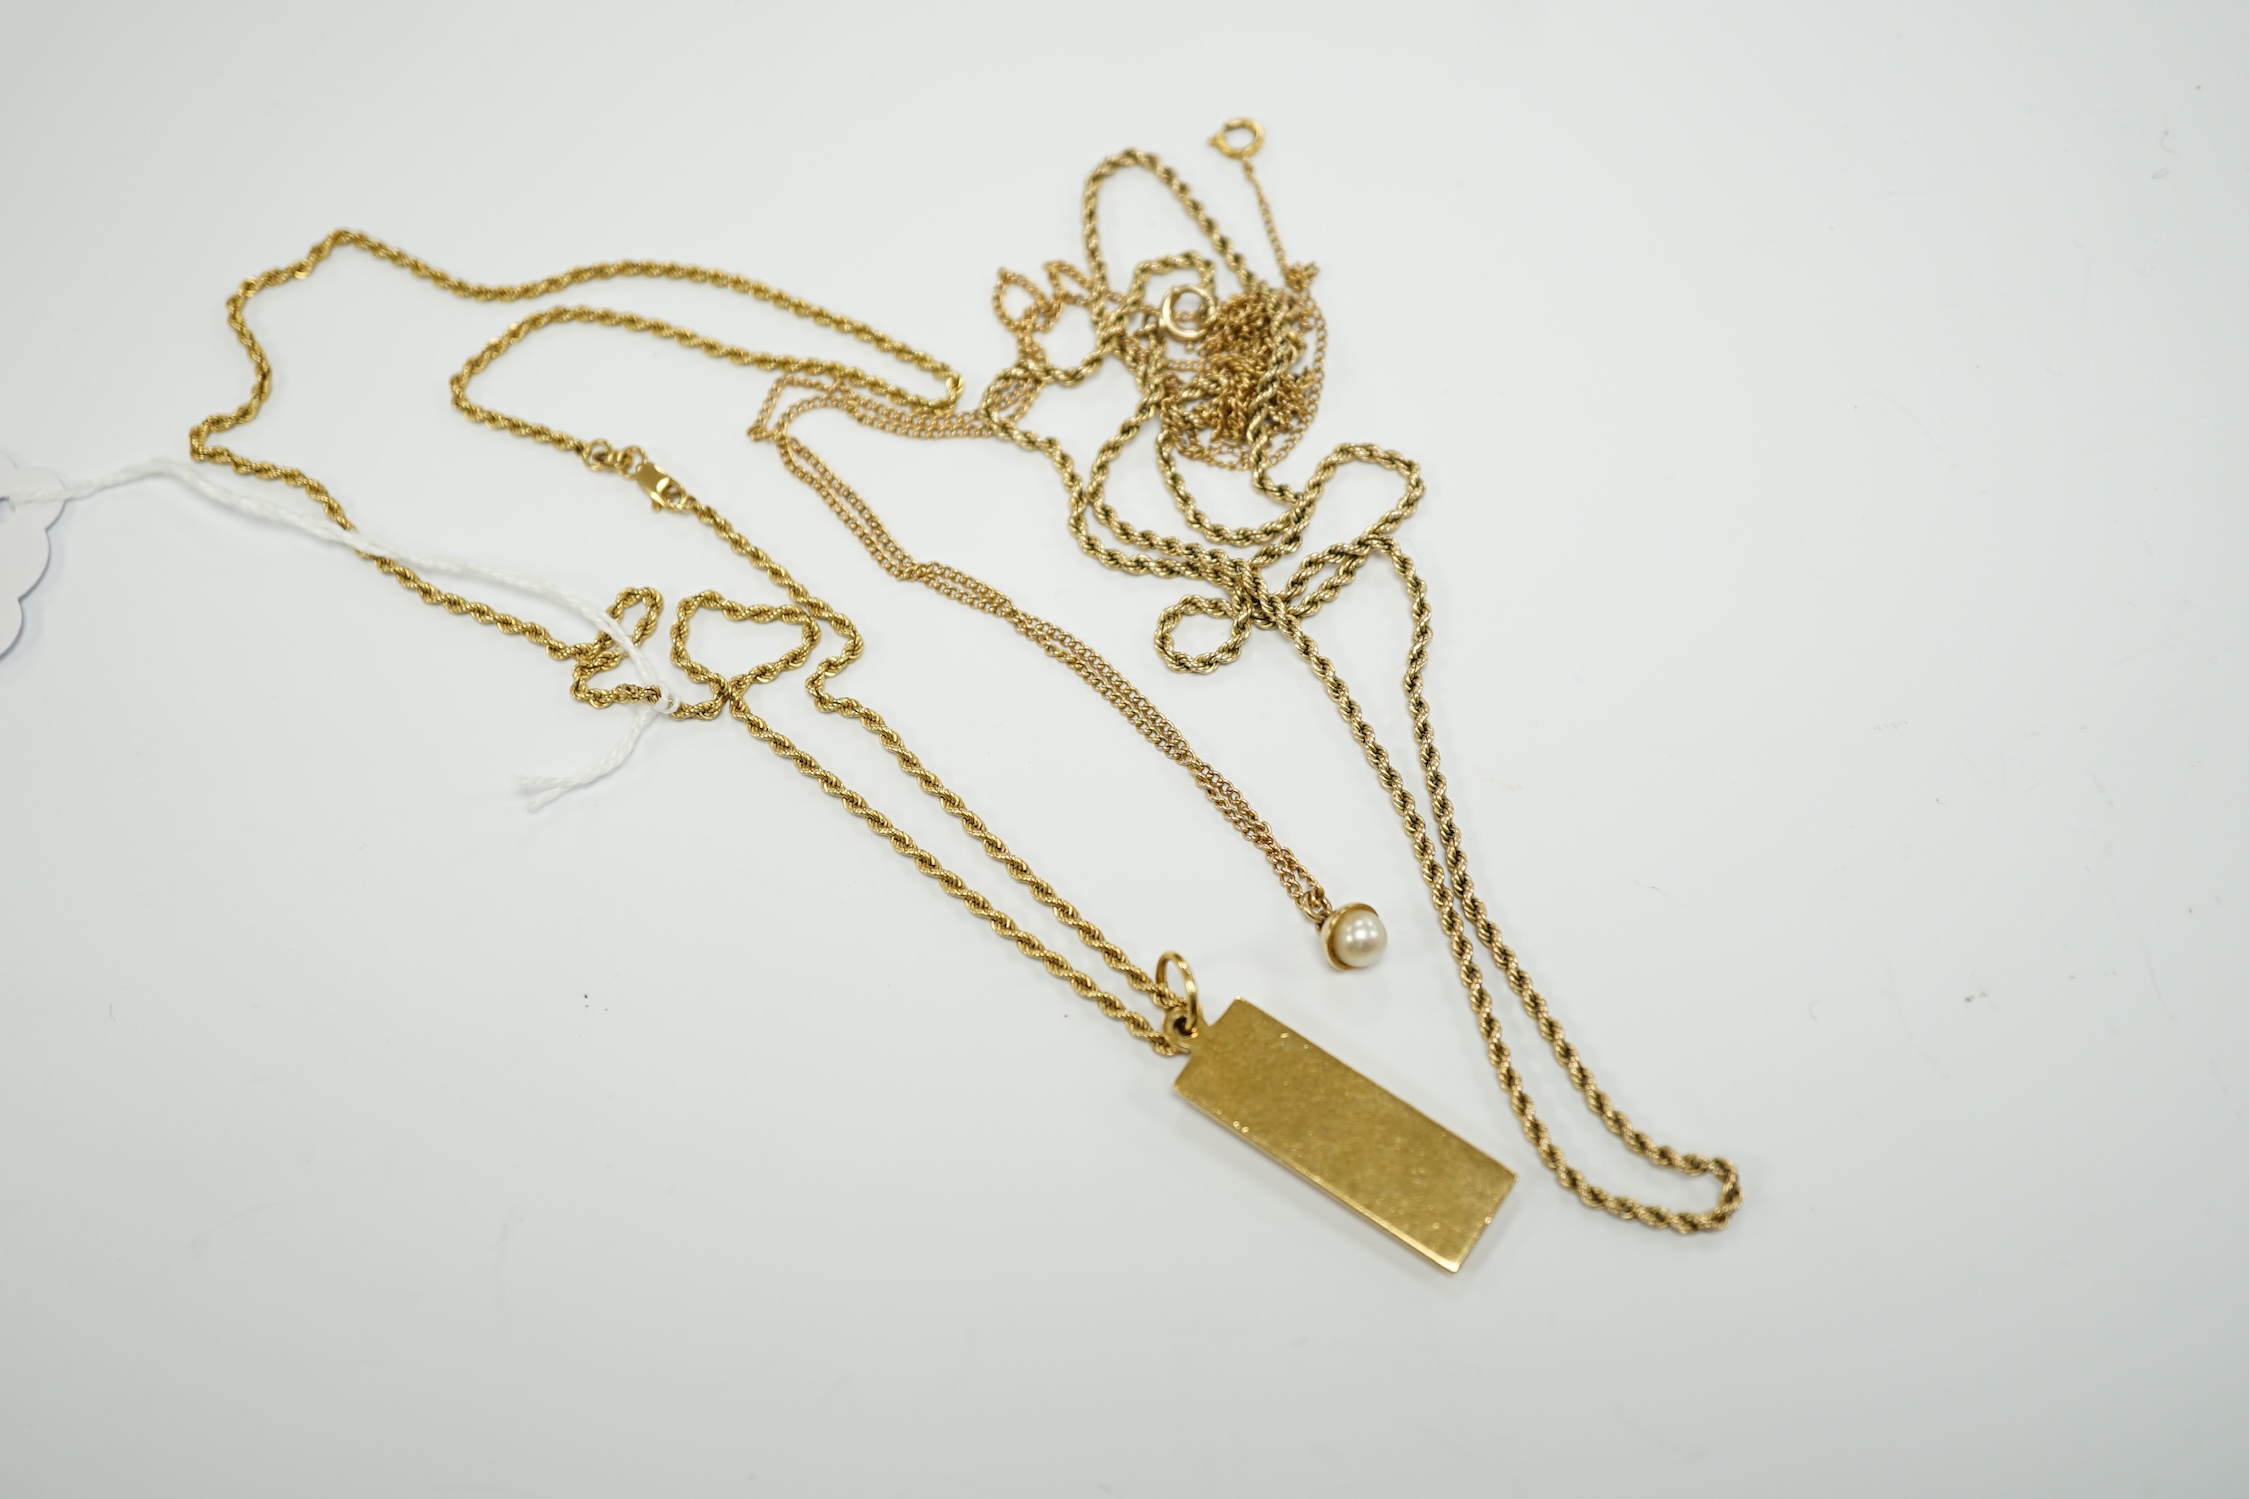 An 18ct gold ingot pendant on an 18k chain, 26.7 grams and two 9ct chains, one with cultured pearl - Image 5 of 7